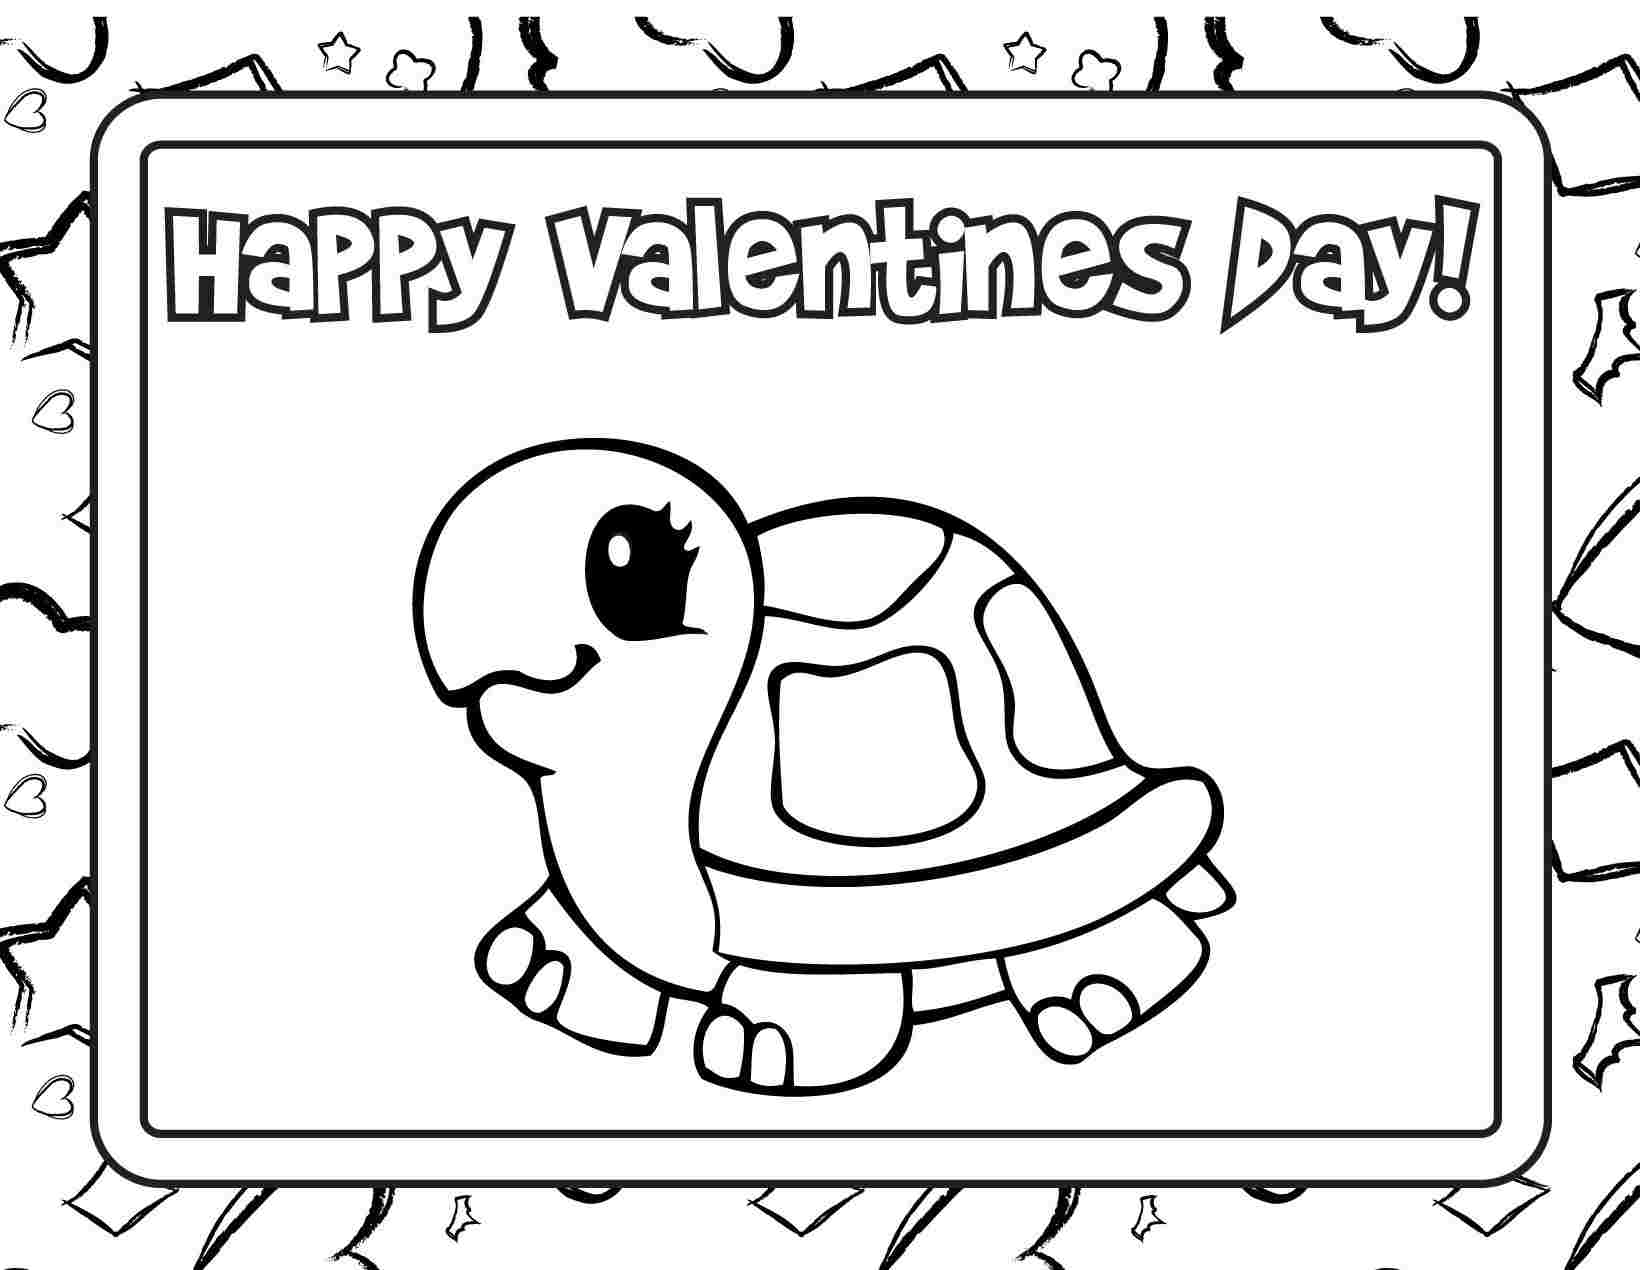 Amazing of Awesome Valentines Day Coloring Pages In Vale #538